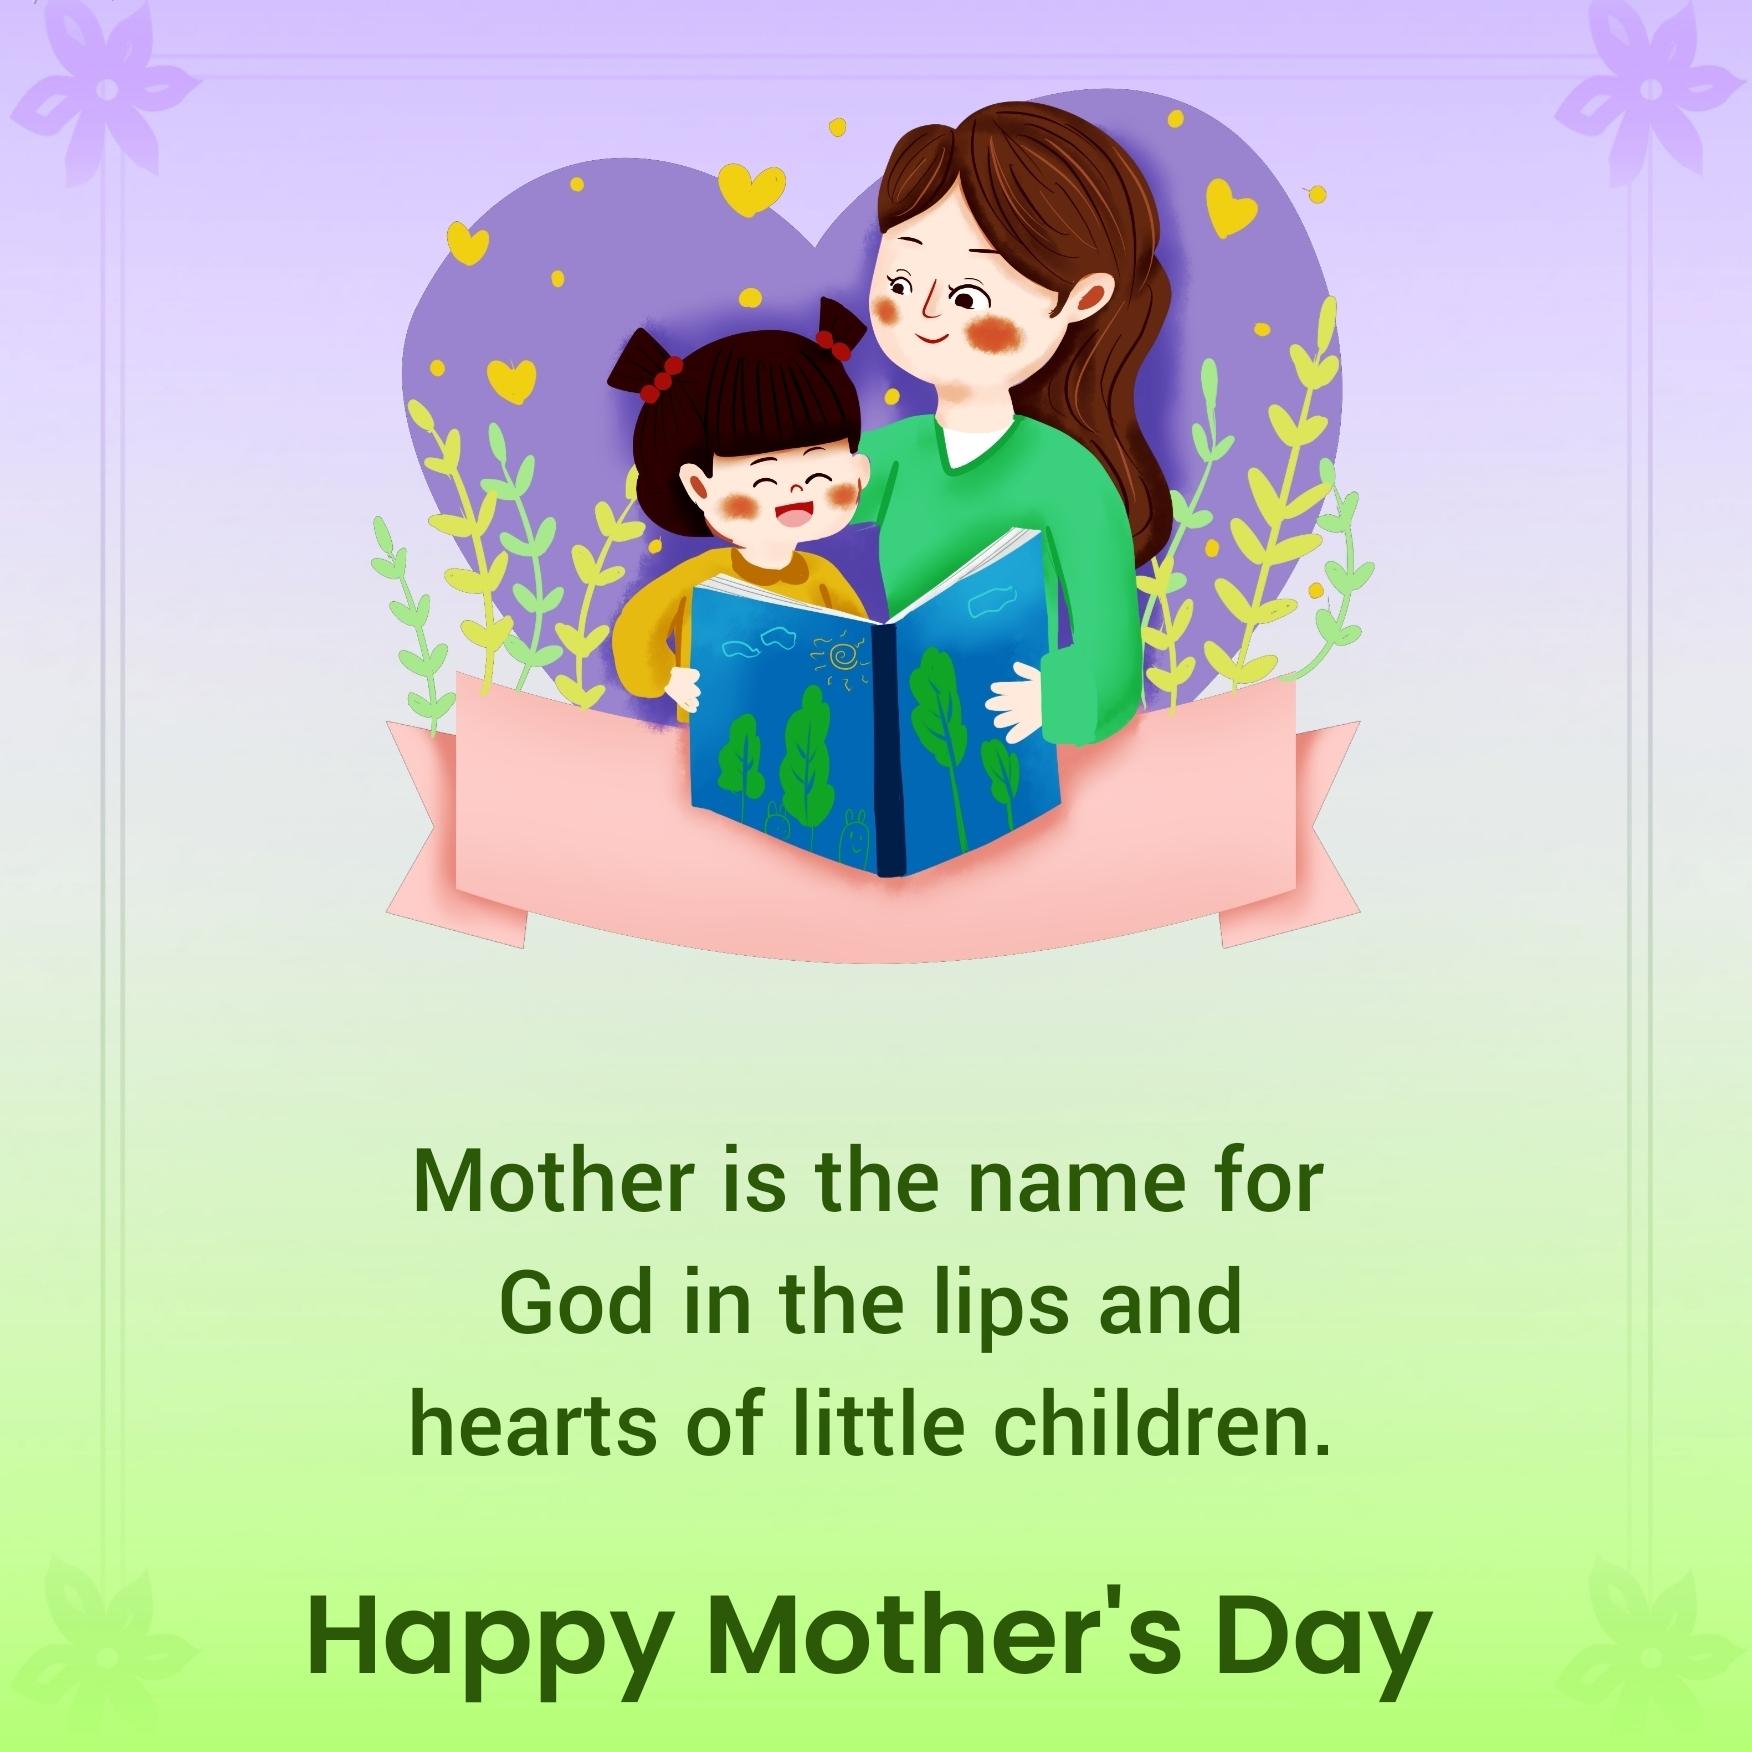 Mother is the name for God in the lips and hearts